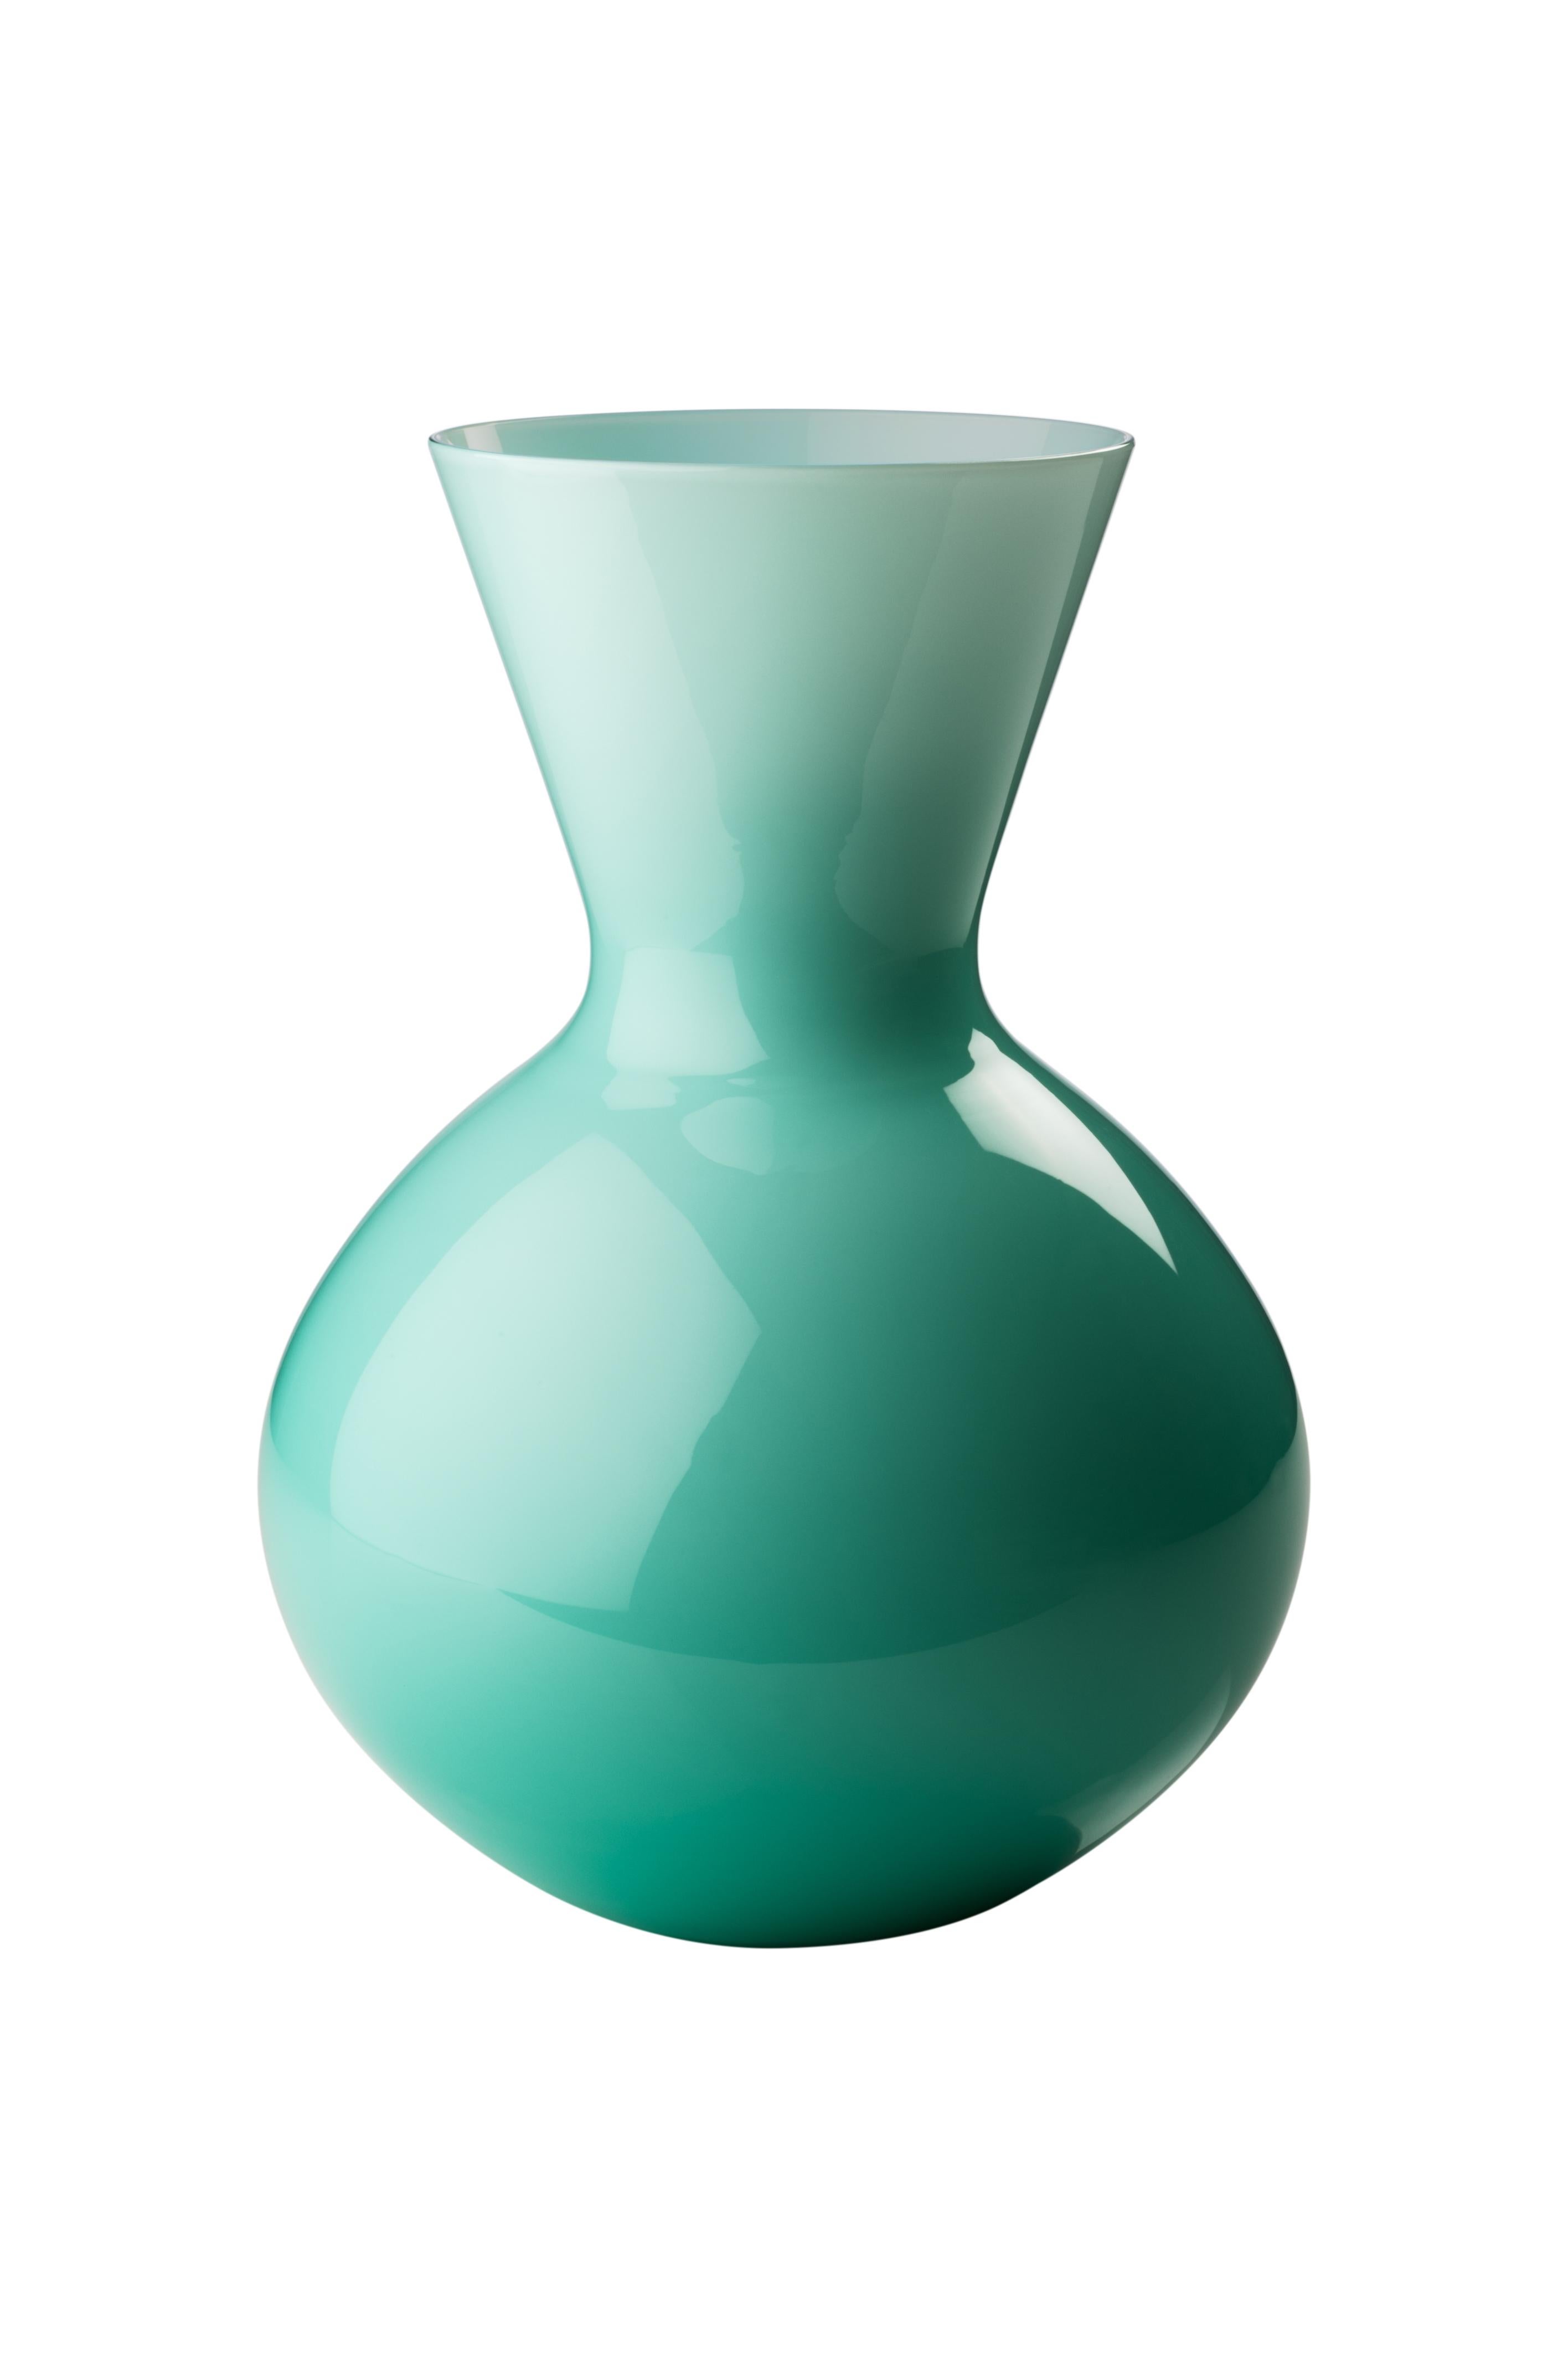 Venini glass vase with round body and angular shaped neck in mint green designed in 2016. Perfect for indoor home decor as container or strong statement piece for any room. Also available in other colors on 1stdibs.

Dimensions: cm diameter x cm